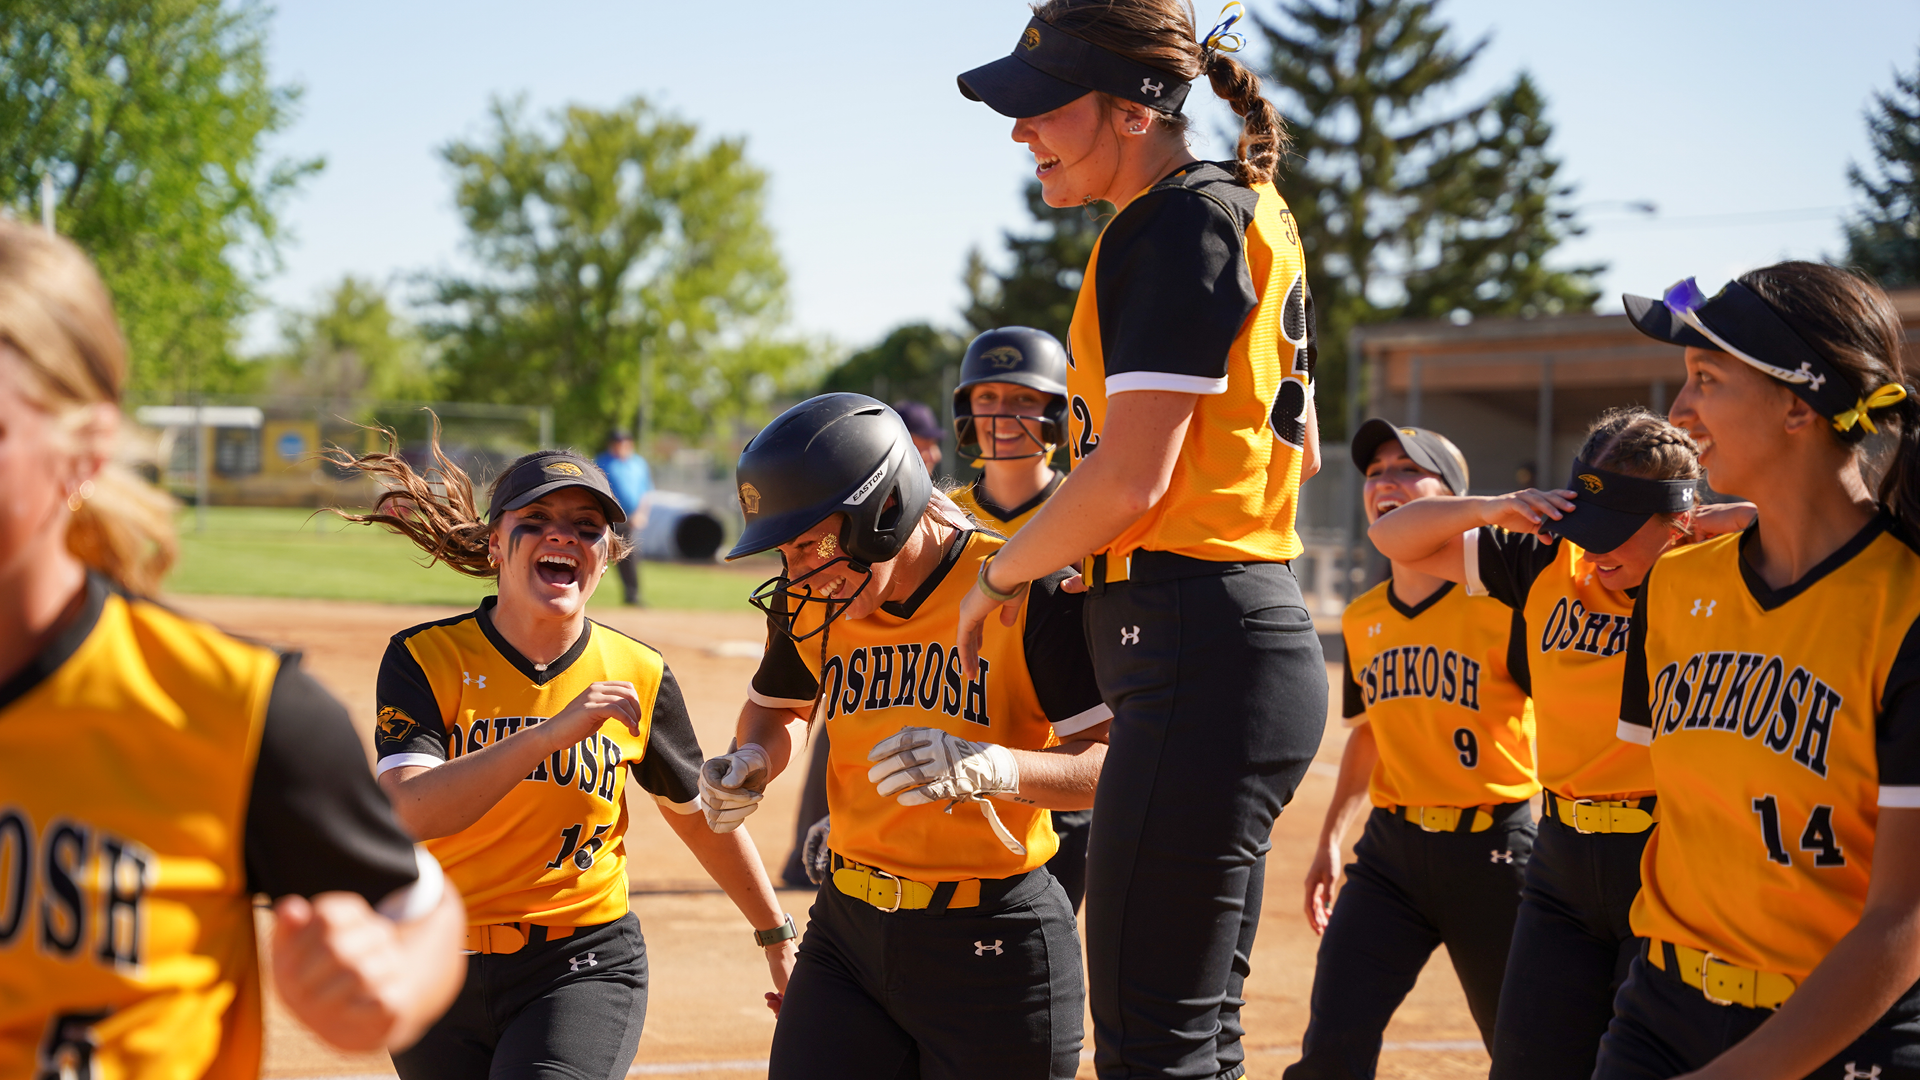 Morgan Rau went 2-for-3 with a run, 5 RBI, grand slam and a walk in the Titans' 8-2 win over the Blue Devils to advance to the WIAC Semifinal. Photo Credit: Terri Cole, UW-Oshkosh Sports Information